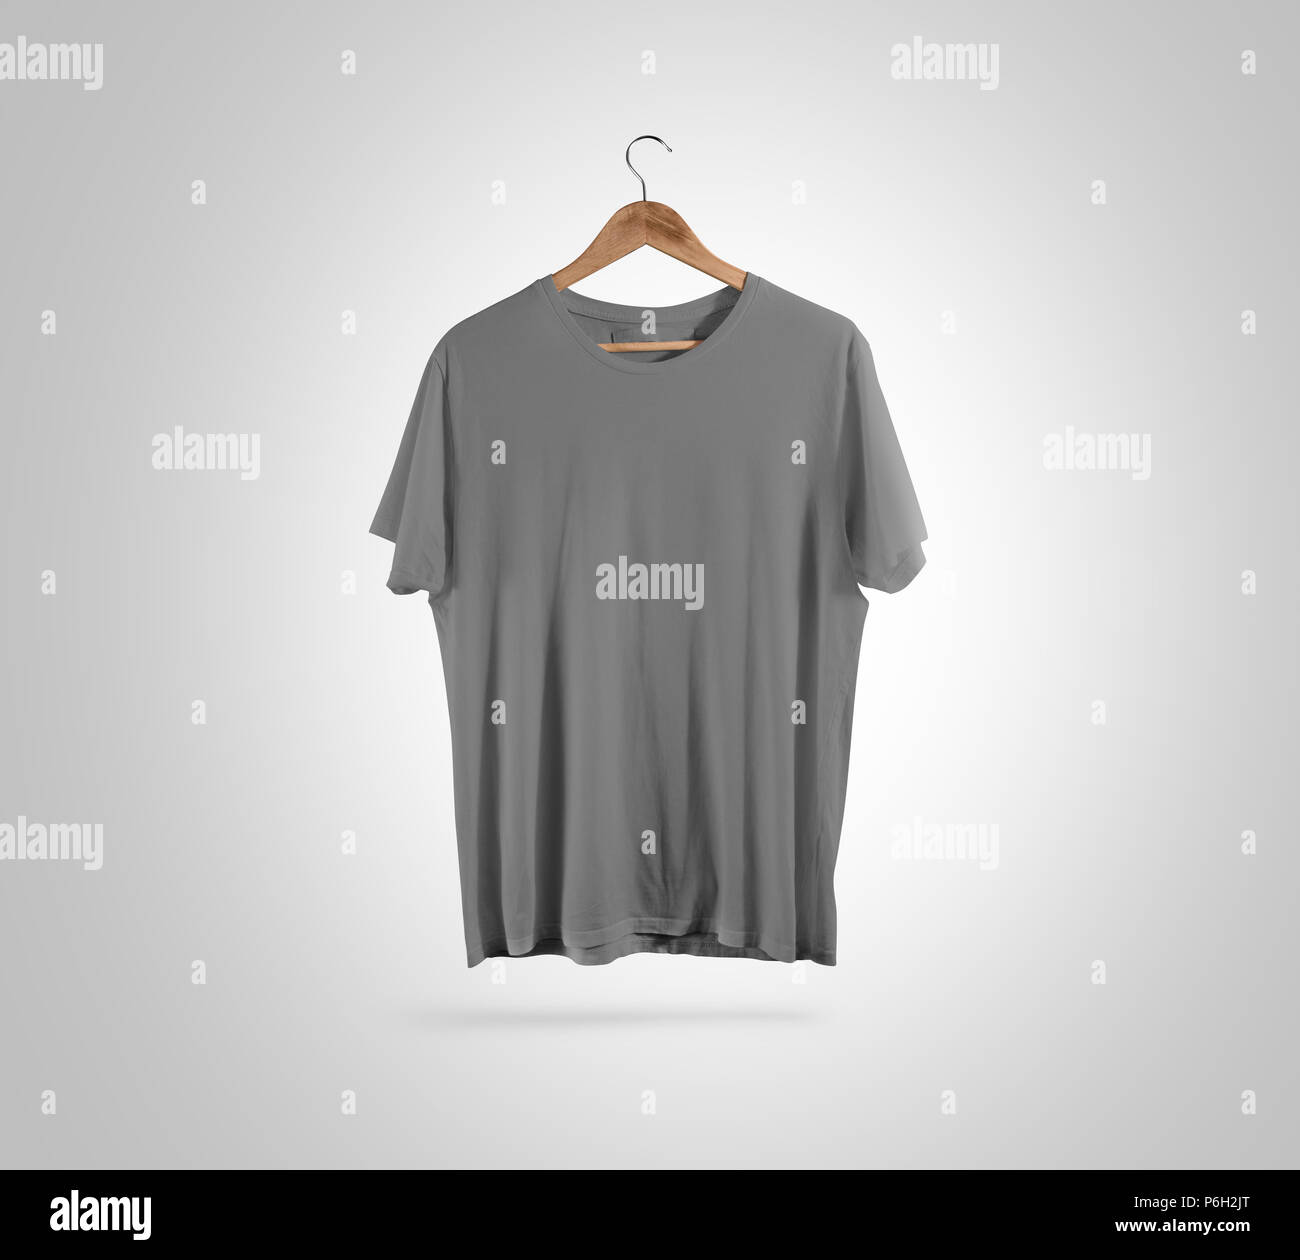 Blank grey t-shirt front side view on hanger, design mockup, clipping path. Gray clear plain cotton tshirt mock up template. Apparel store logo branding display. Crew shirt surface hang on wood hanger Stock Photo